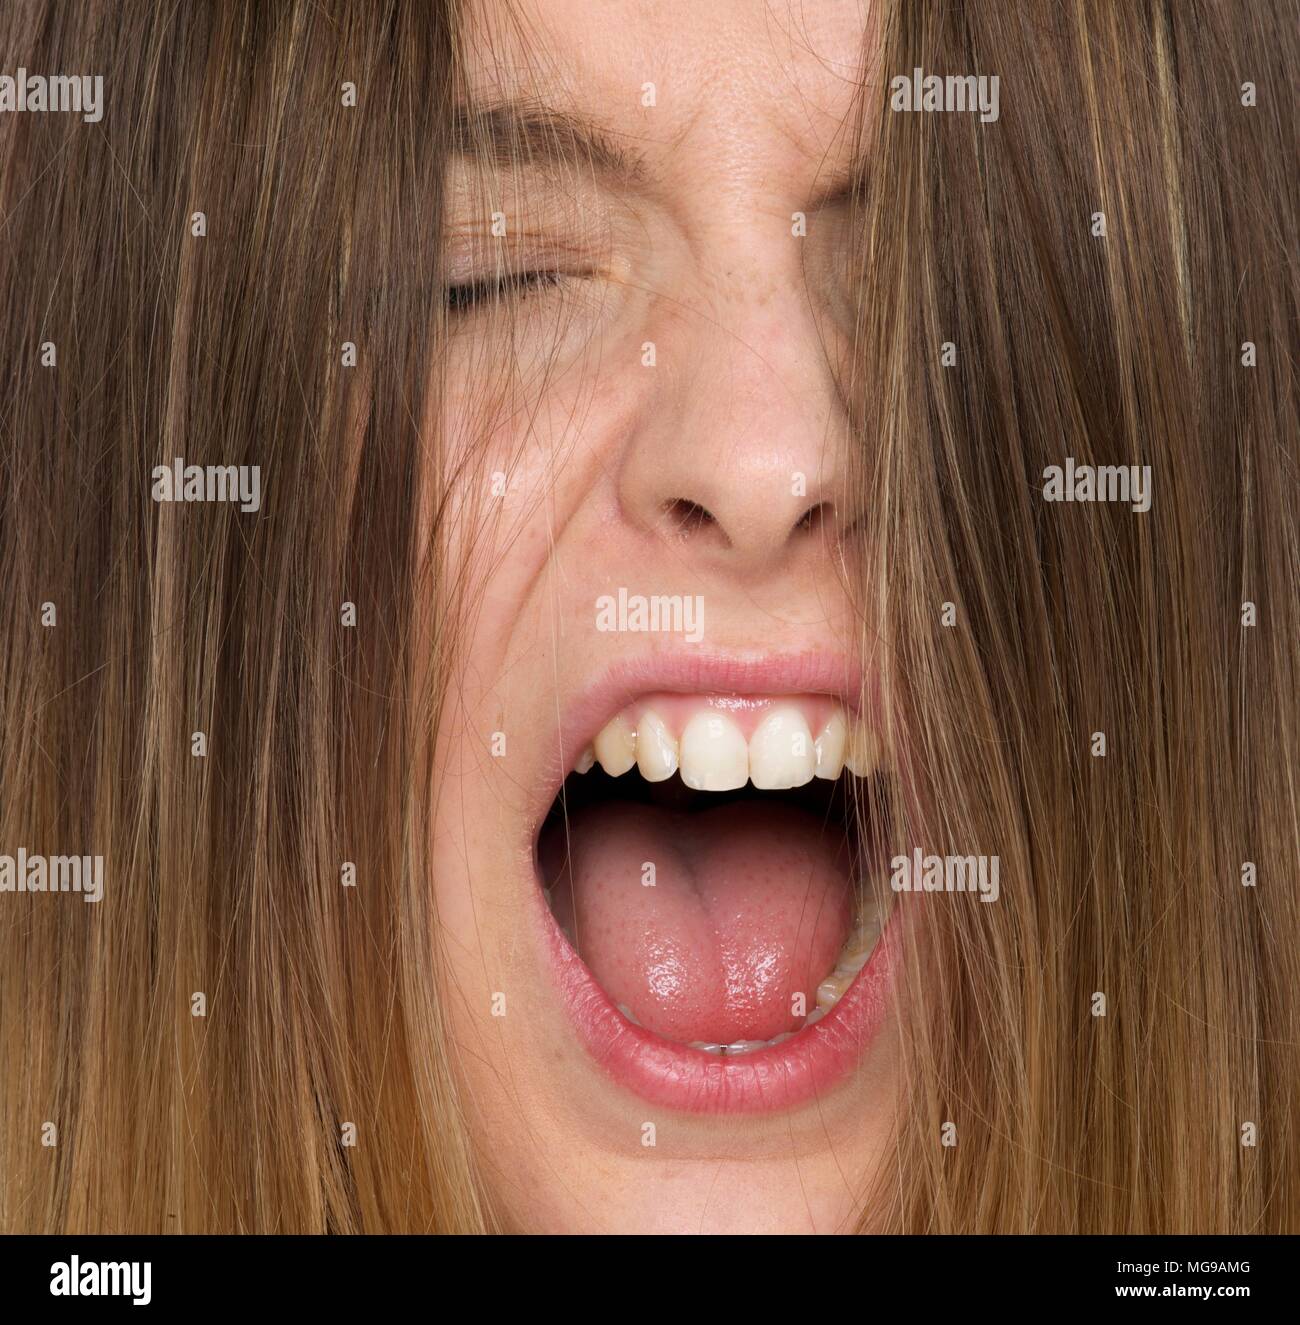 Young woman shouting with mouth open. Stock Photo